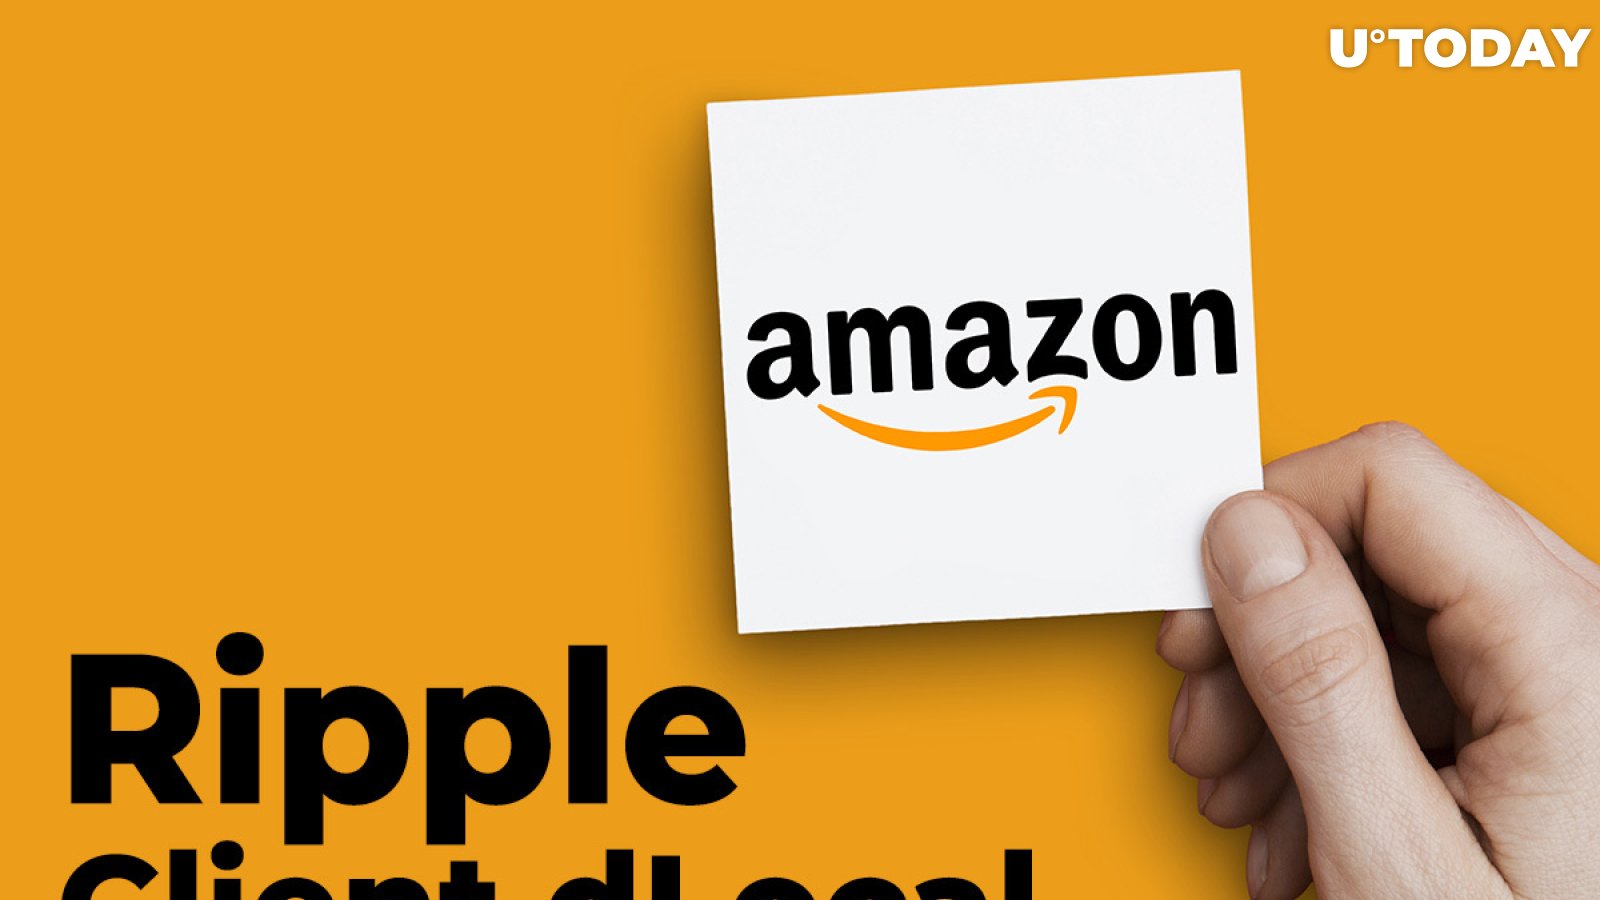 Ripple Client dLocal Expands Partnership with Amazon to Let International Merchants Sell Goods in Brazil